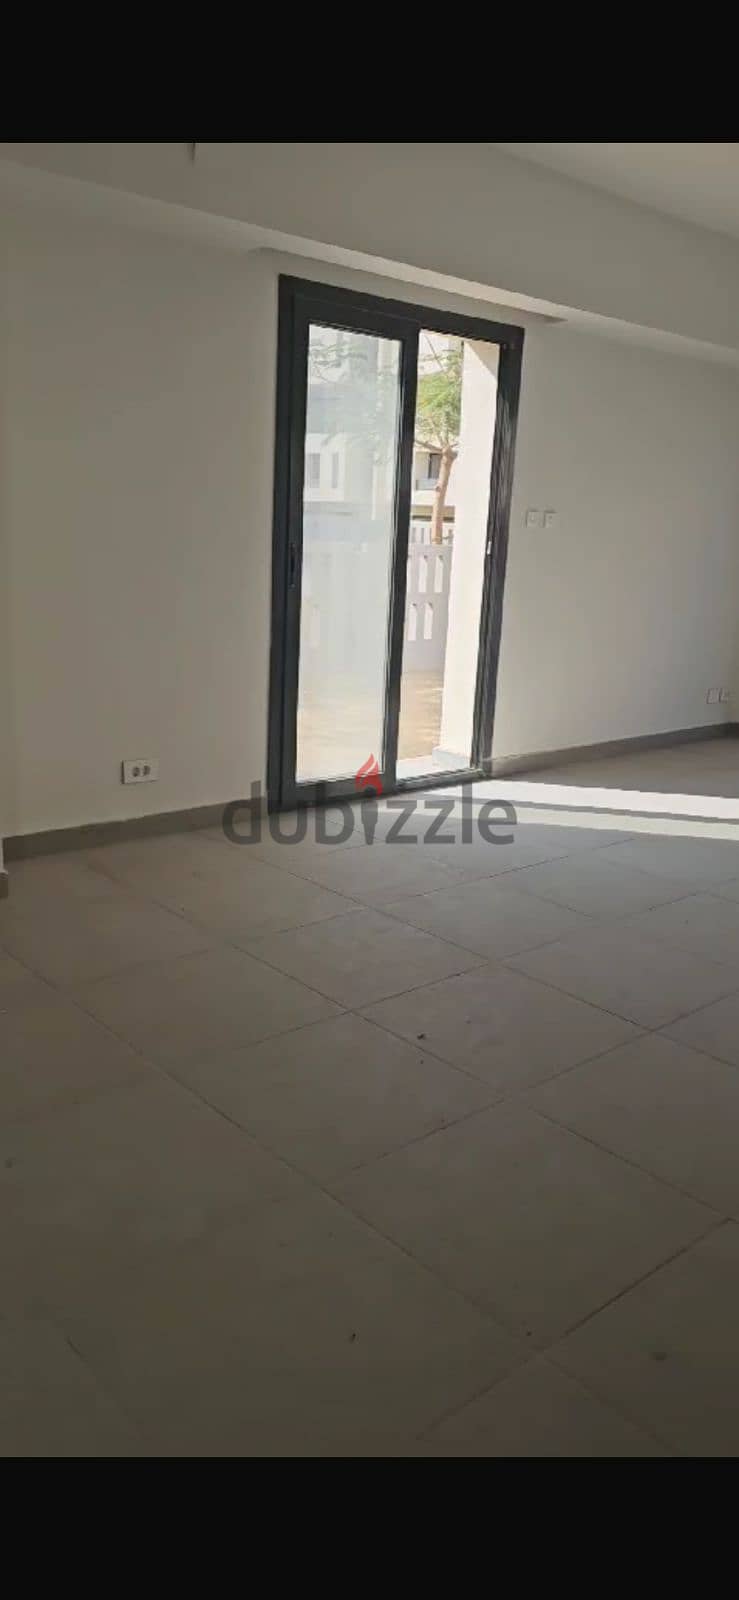 Duplex 175 sqm, immediate receipt, fully finished, next to the International Medical Center in Shorouk City, Al Burouj Compound 1